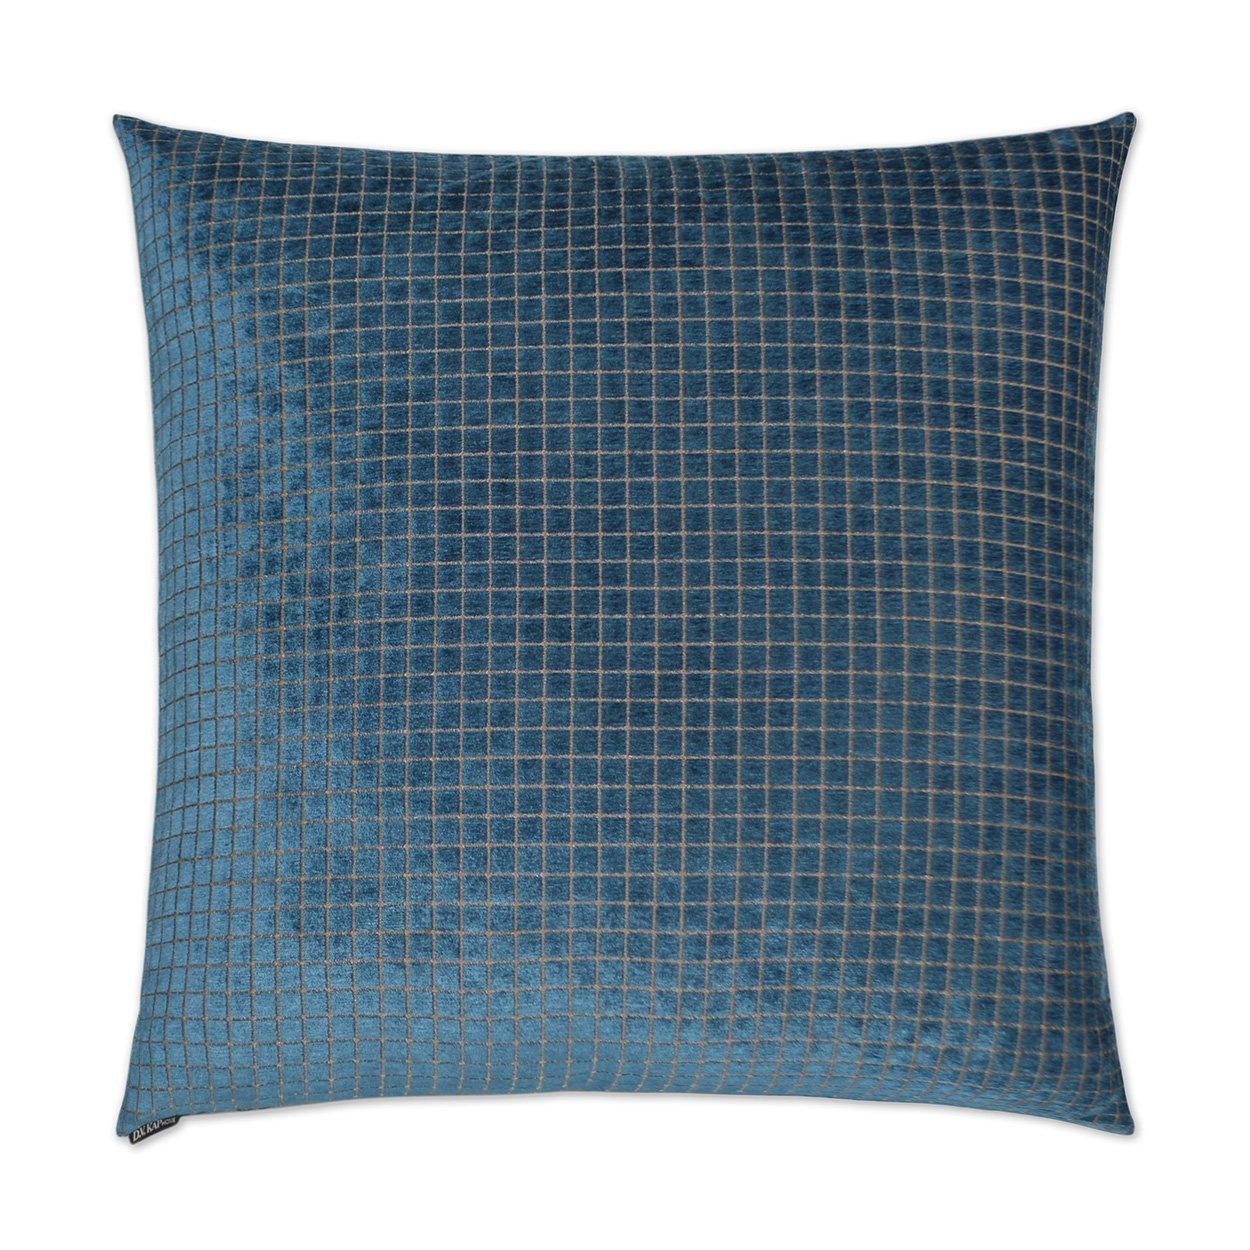 Luxury Pillow -  24" x 24" - Electric Peacock; bright blue solid with a gold/tan geometric pattern